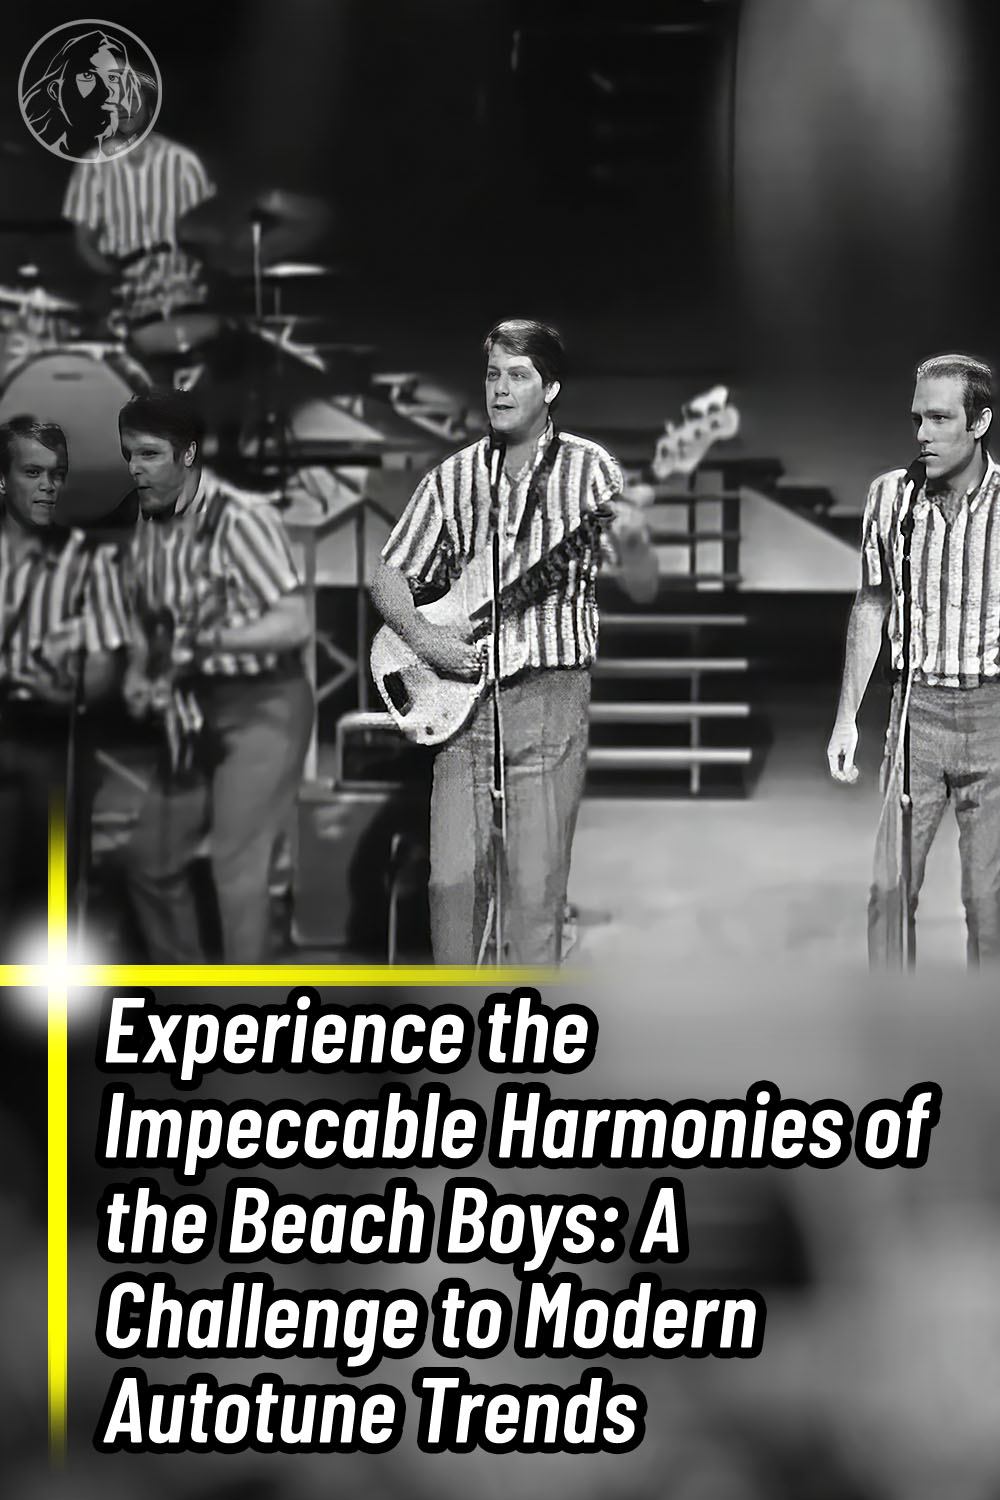 Experience the Impeccable Harmonies of the Beach Boys: A Challenge to Modern Autotune Trends